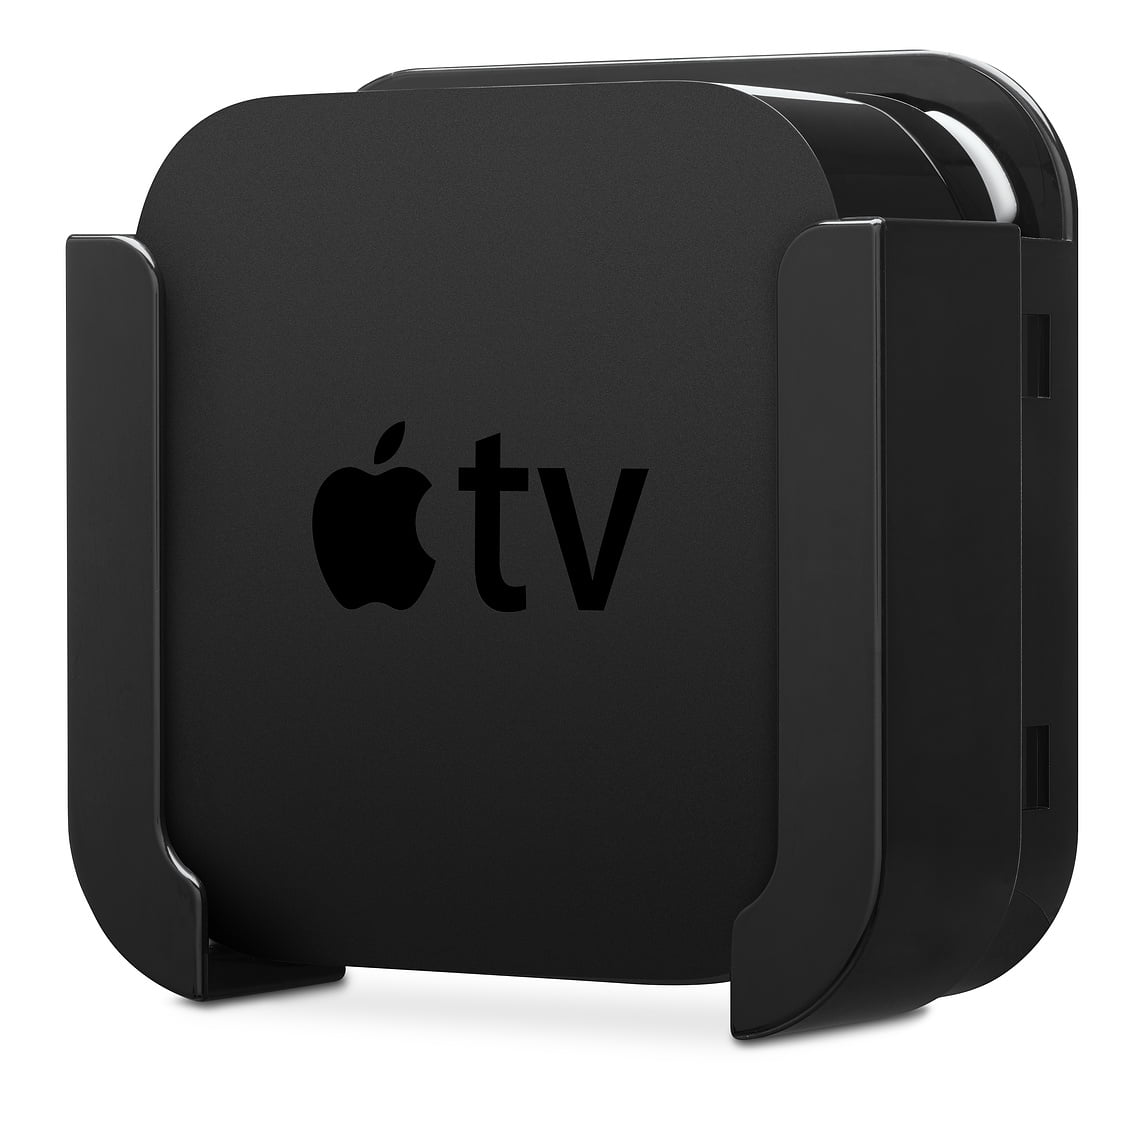 The next Apple TV will be focused on gaming